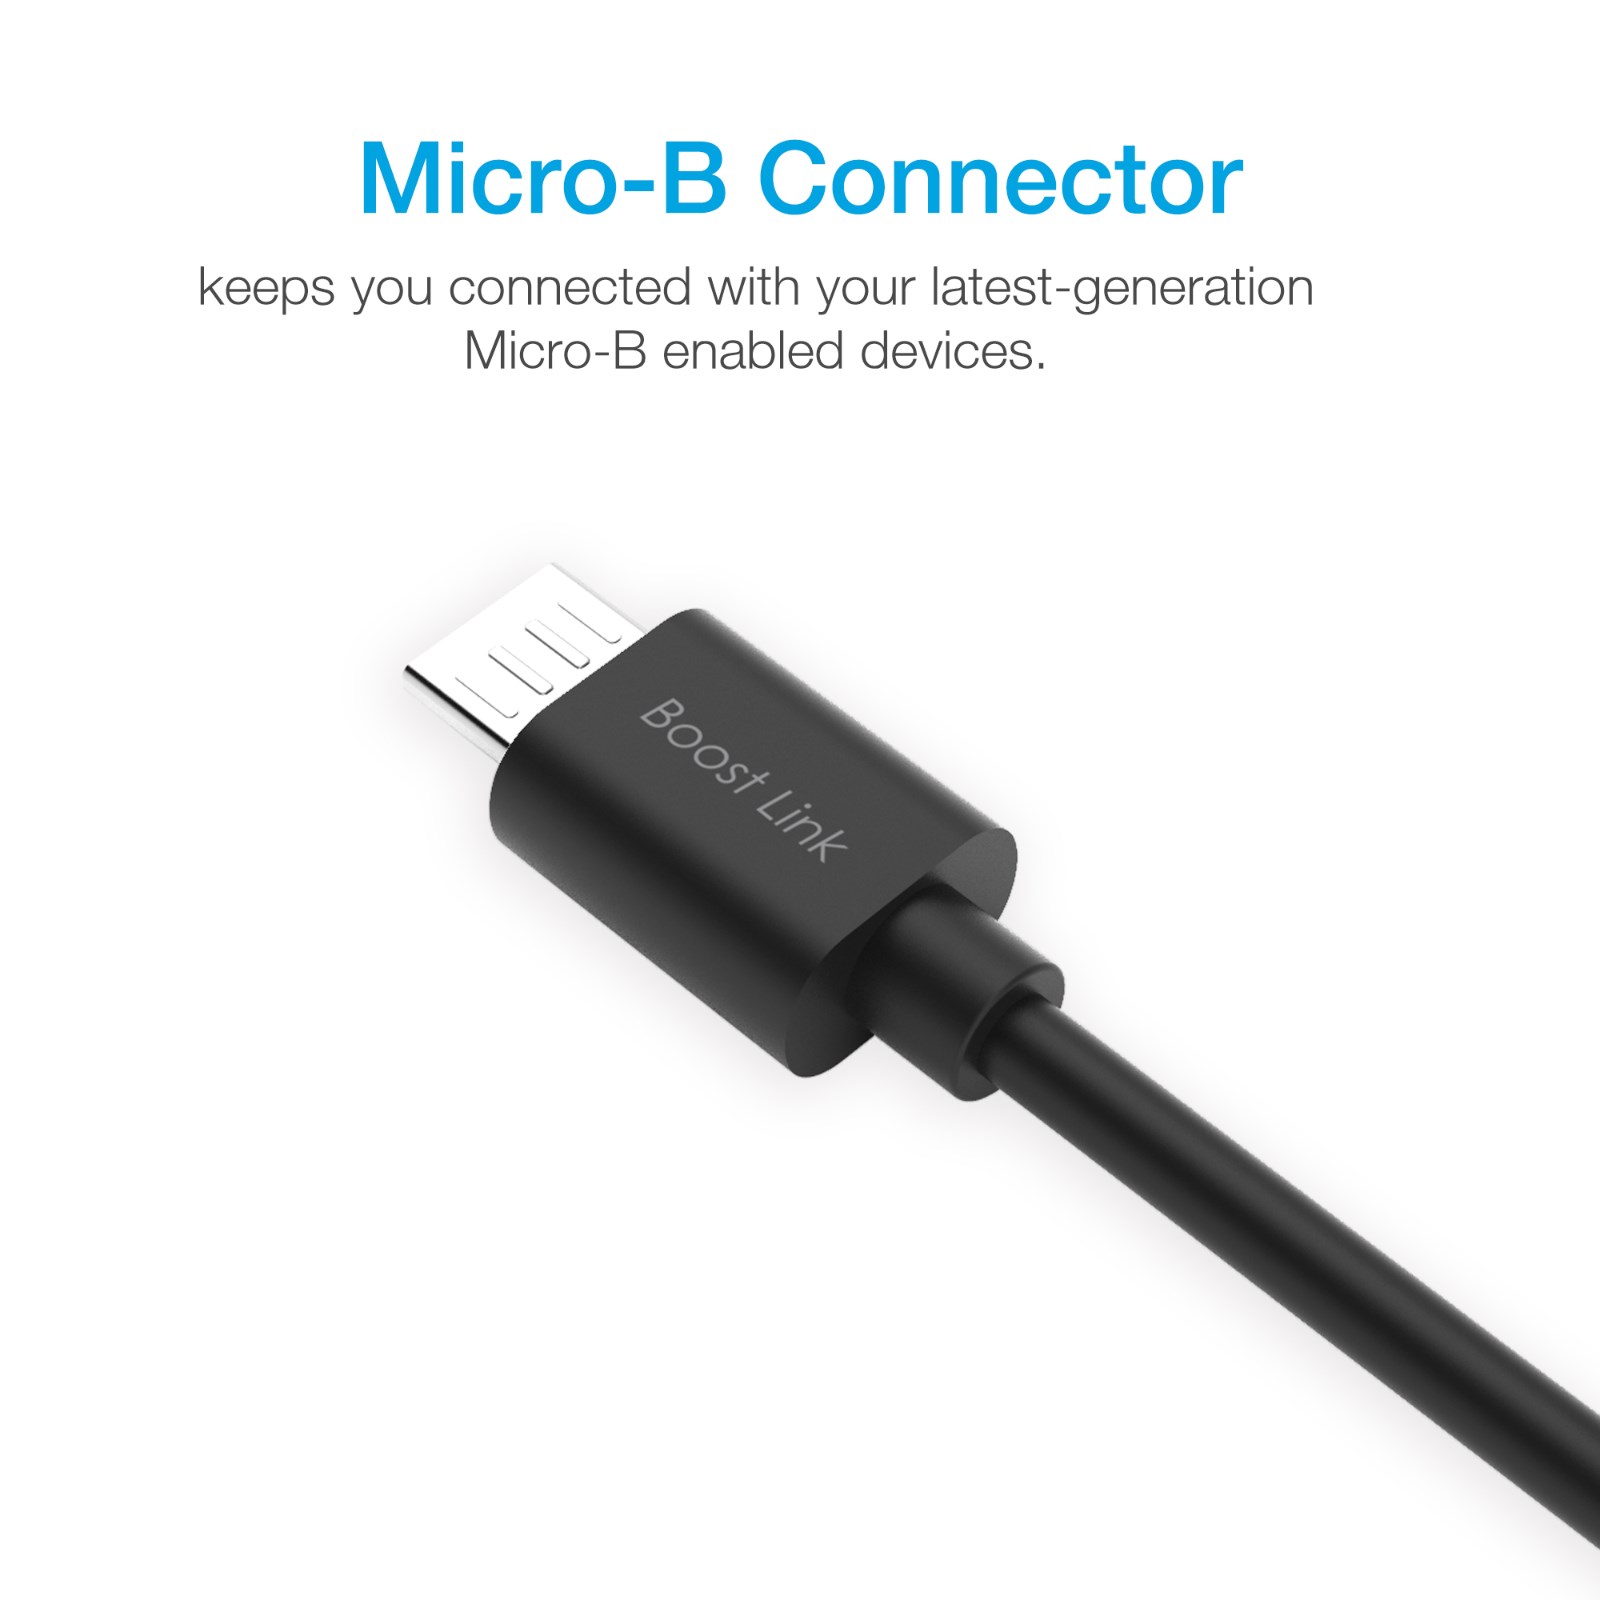 Silicon Power Quick Charge 3.0 USB Micro B to USB-A 3.0 Data Transfer Charger Cable-Black,PVC